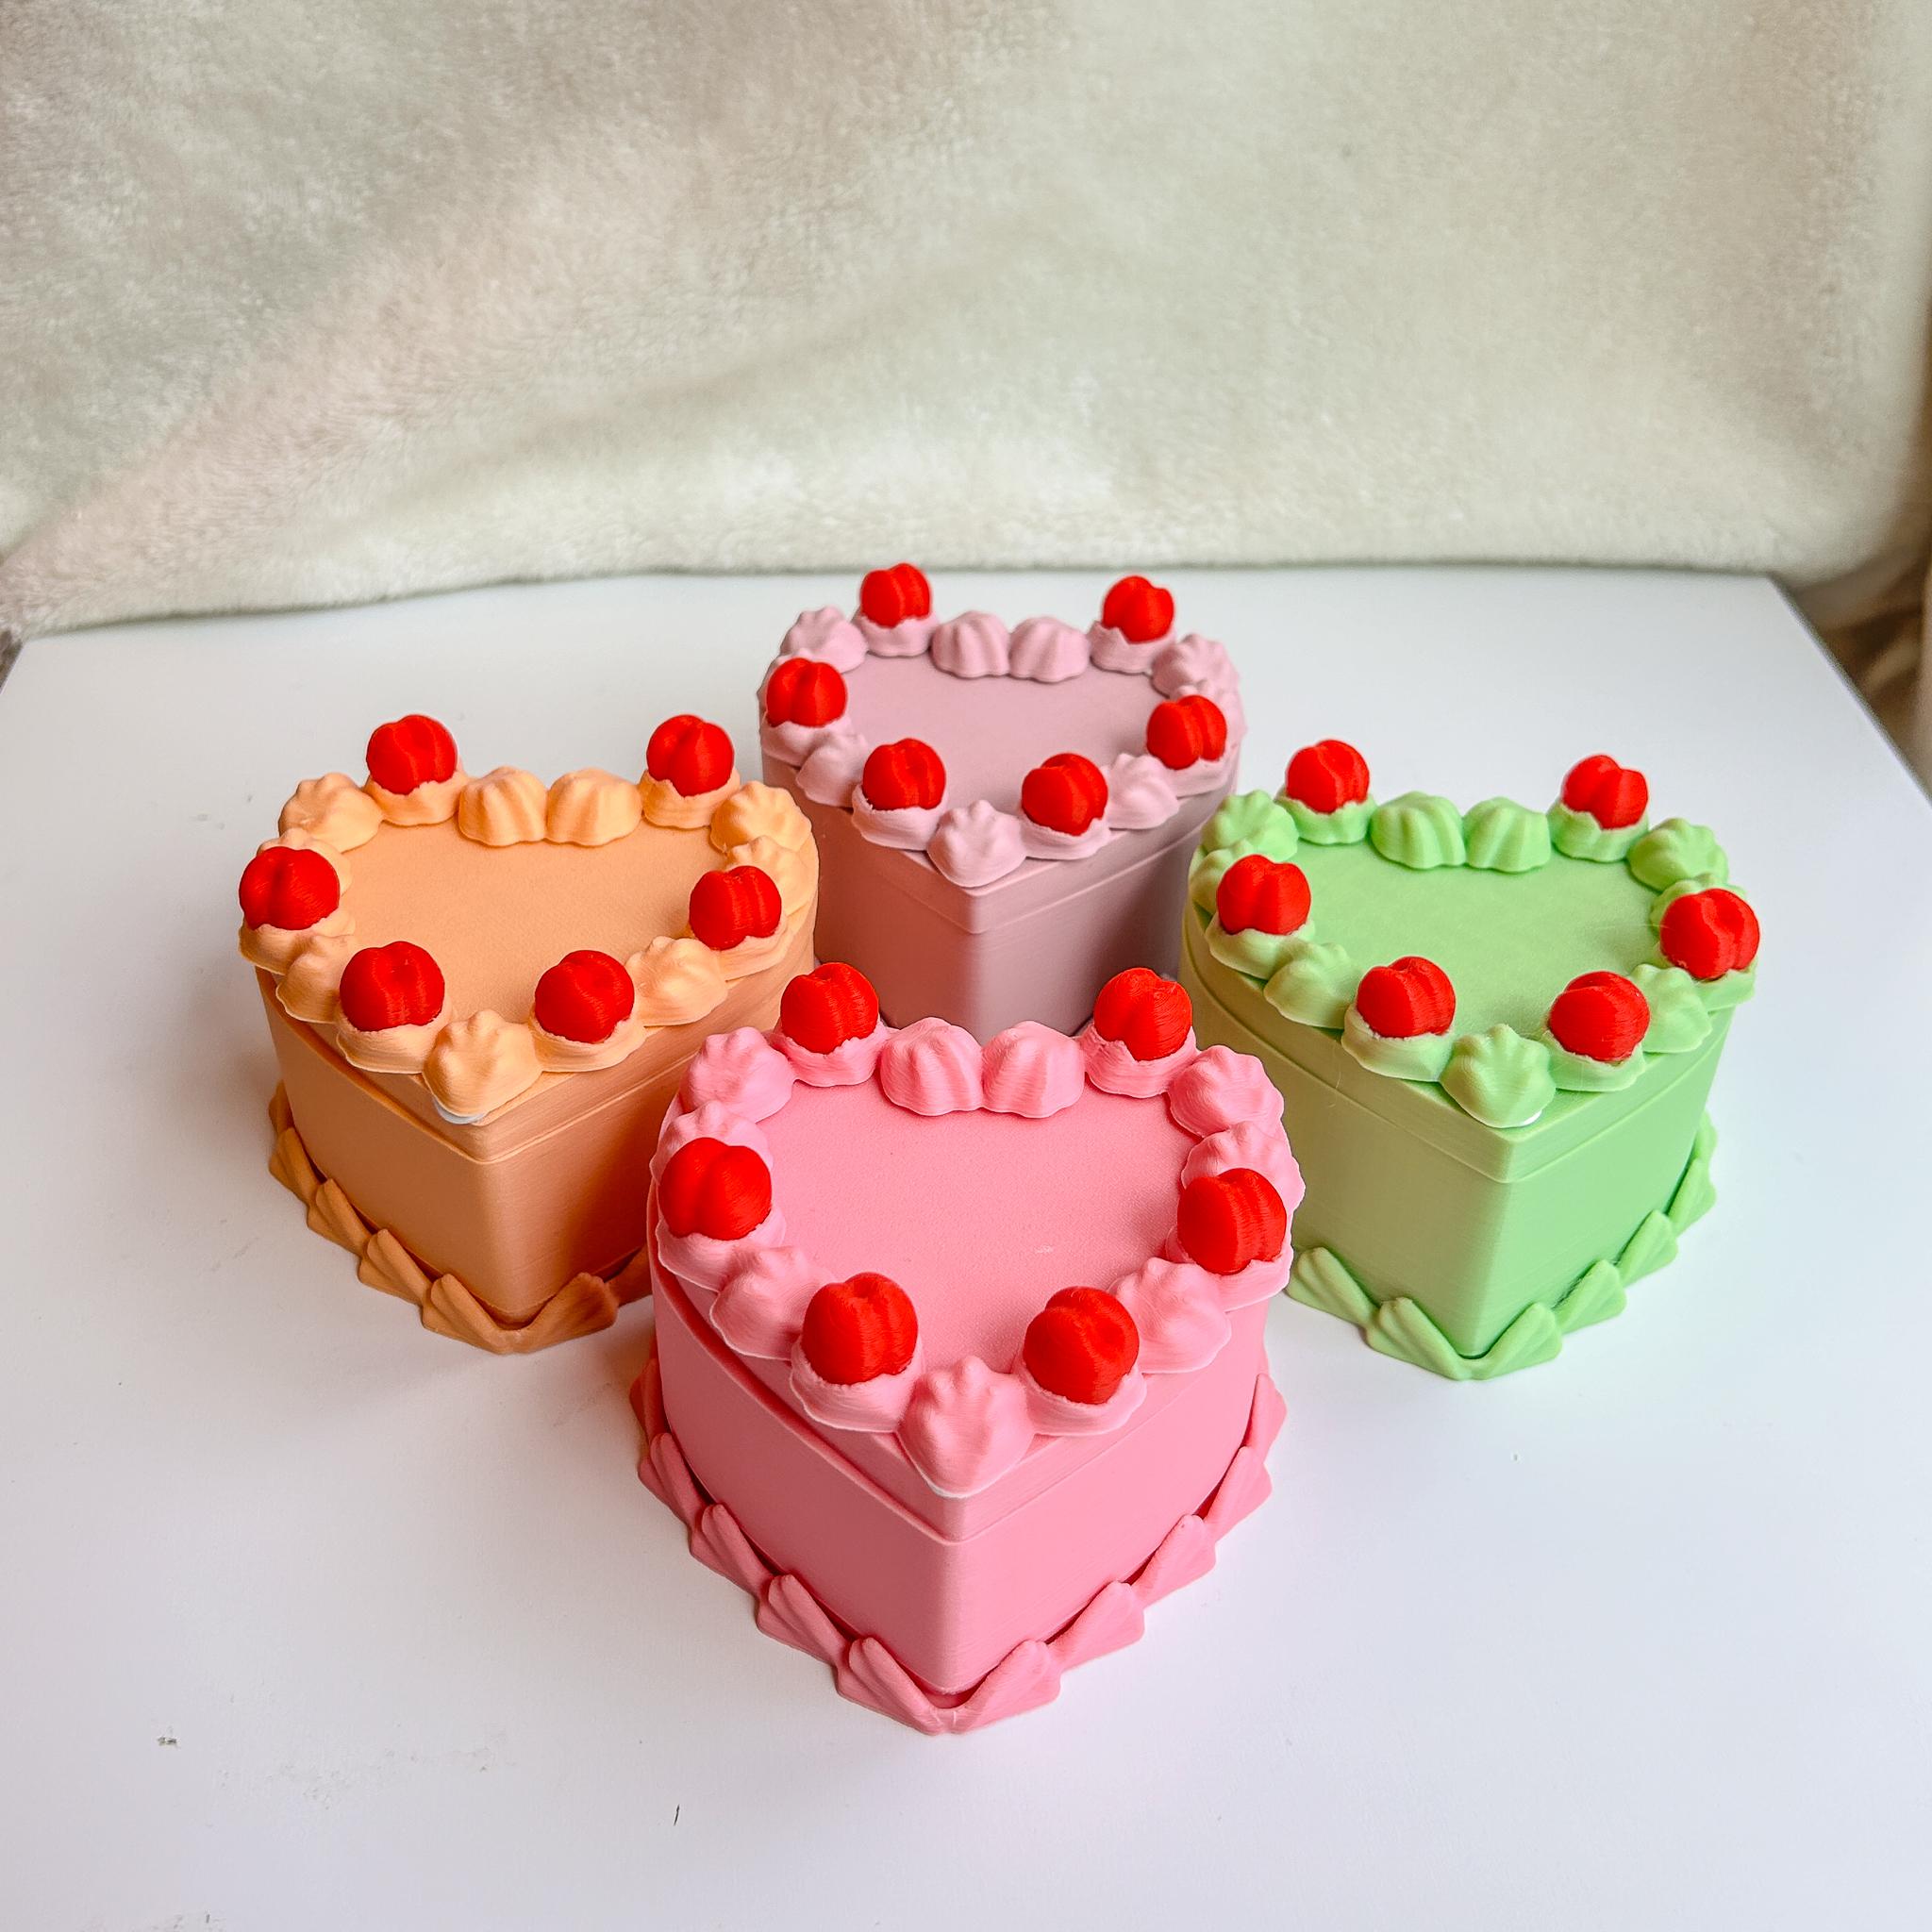 Heart-Shaped Cake Jewelry Box - Vintage, Kitsch Cake Container and Gift Holder 3d model